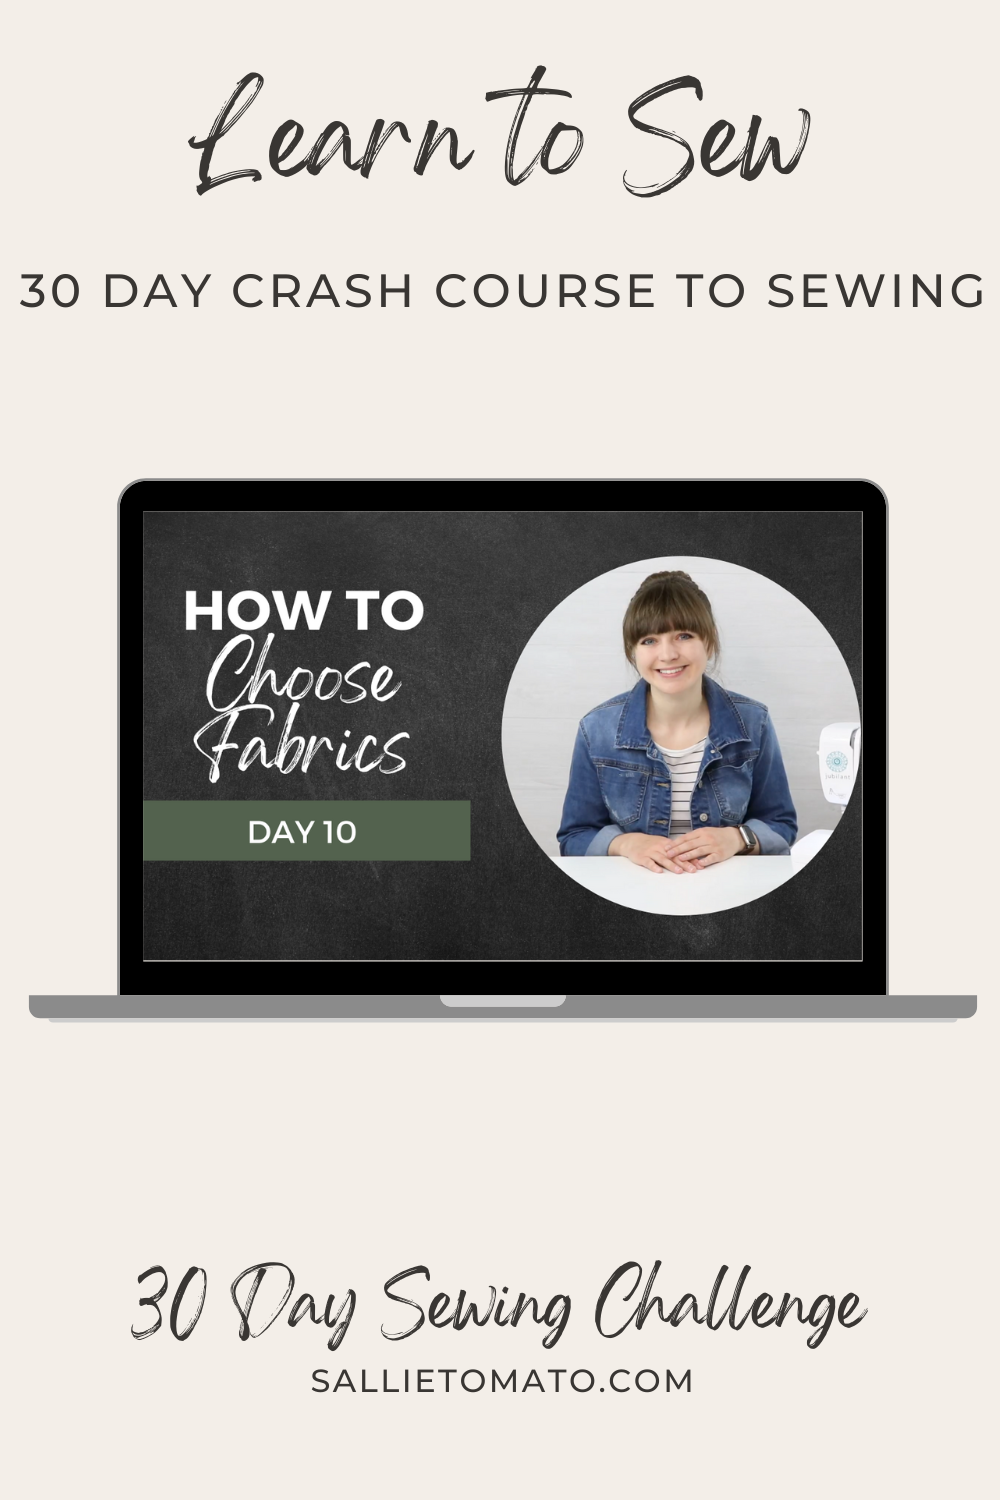 How to Choose Fabrics (Shopping Tips!) | Day 10 of 30 Day Challenge